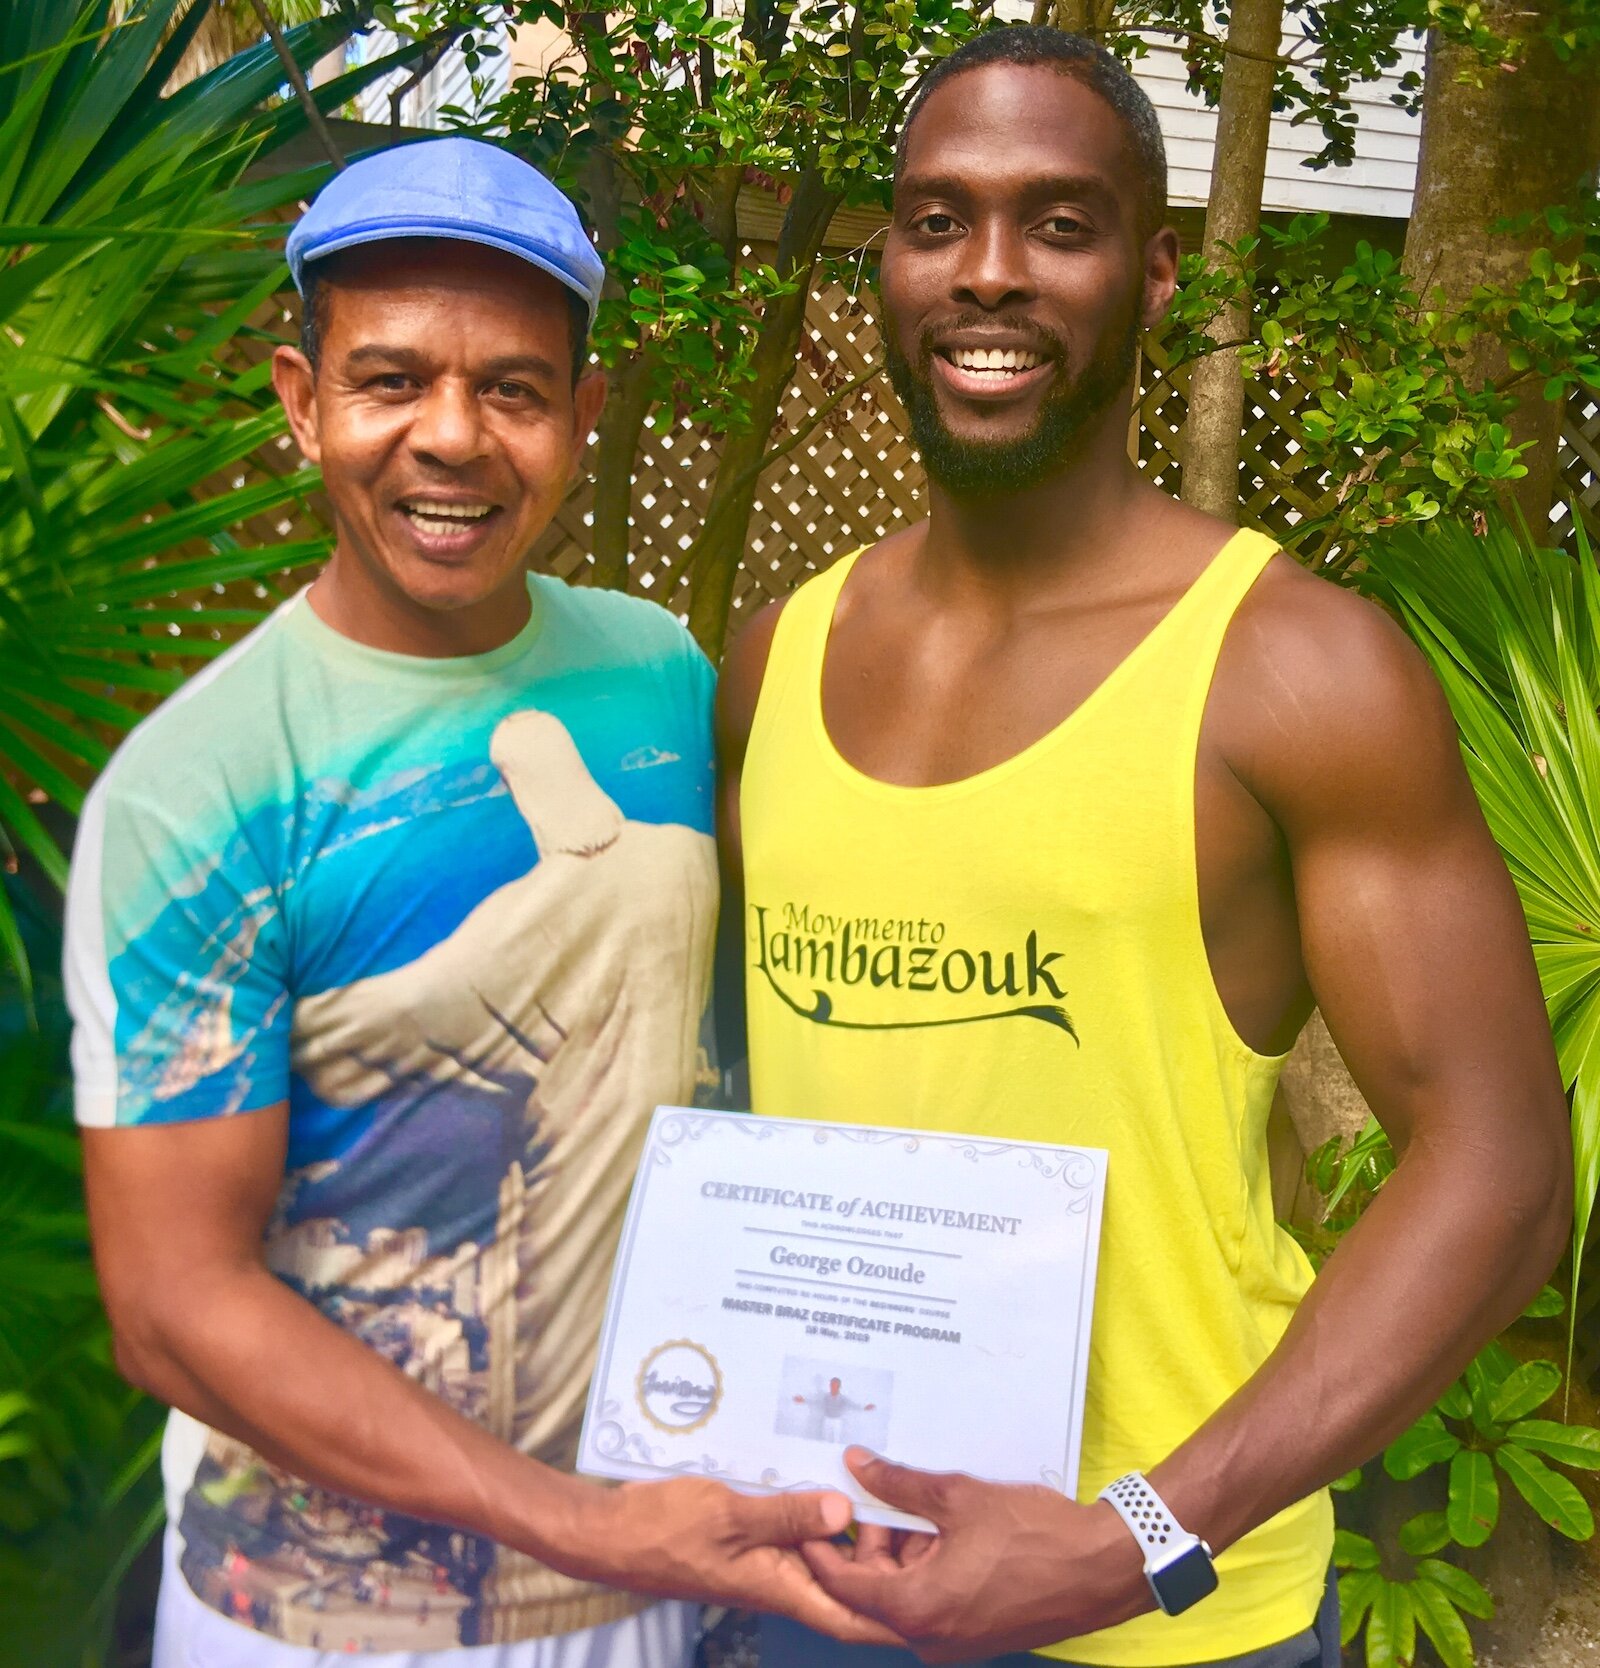 George Ozoude Completes Master Braz Certificate Course